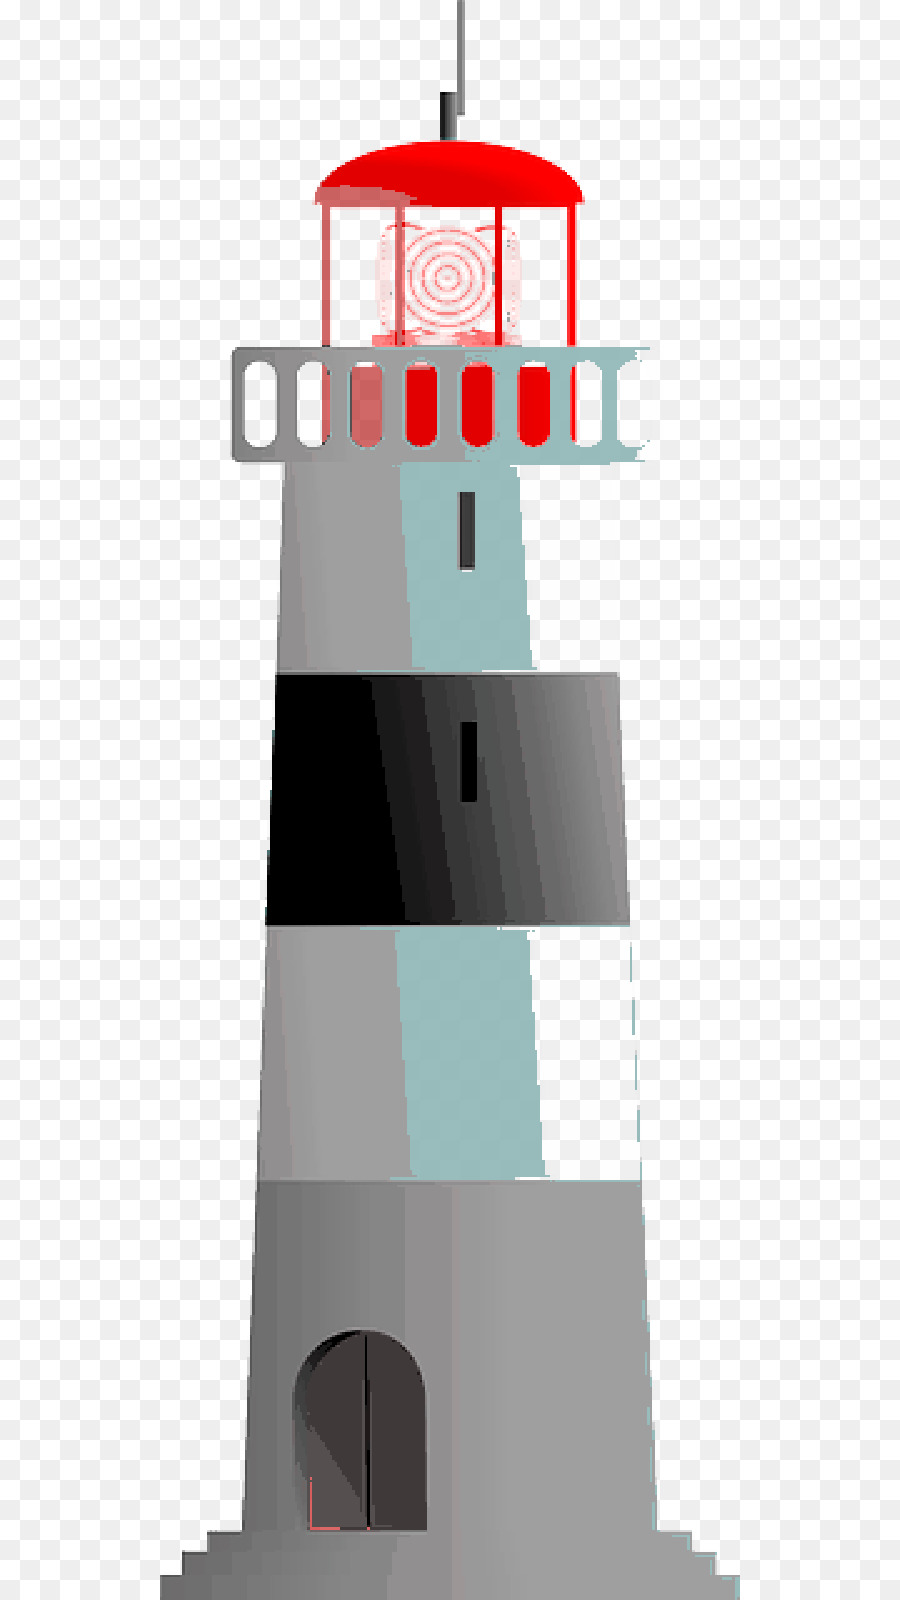 Clip art Portable Network Graphics Vector graphics Free content Lighthouse - light tower png download - 800*1600 - Free Transparent Lighthouse png Download.